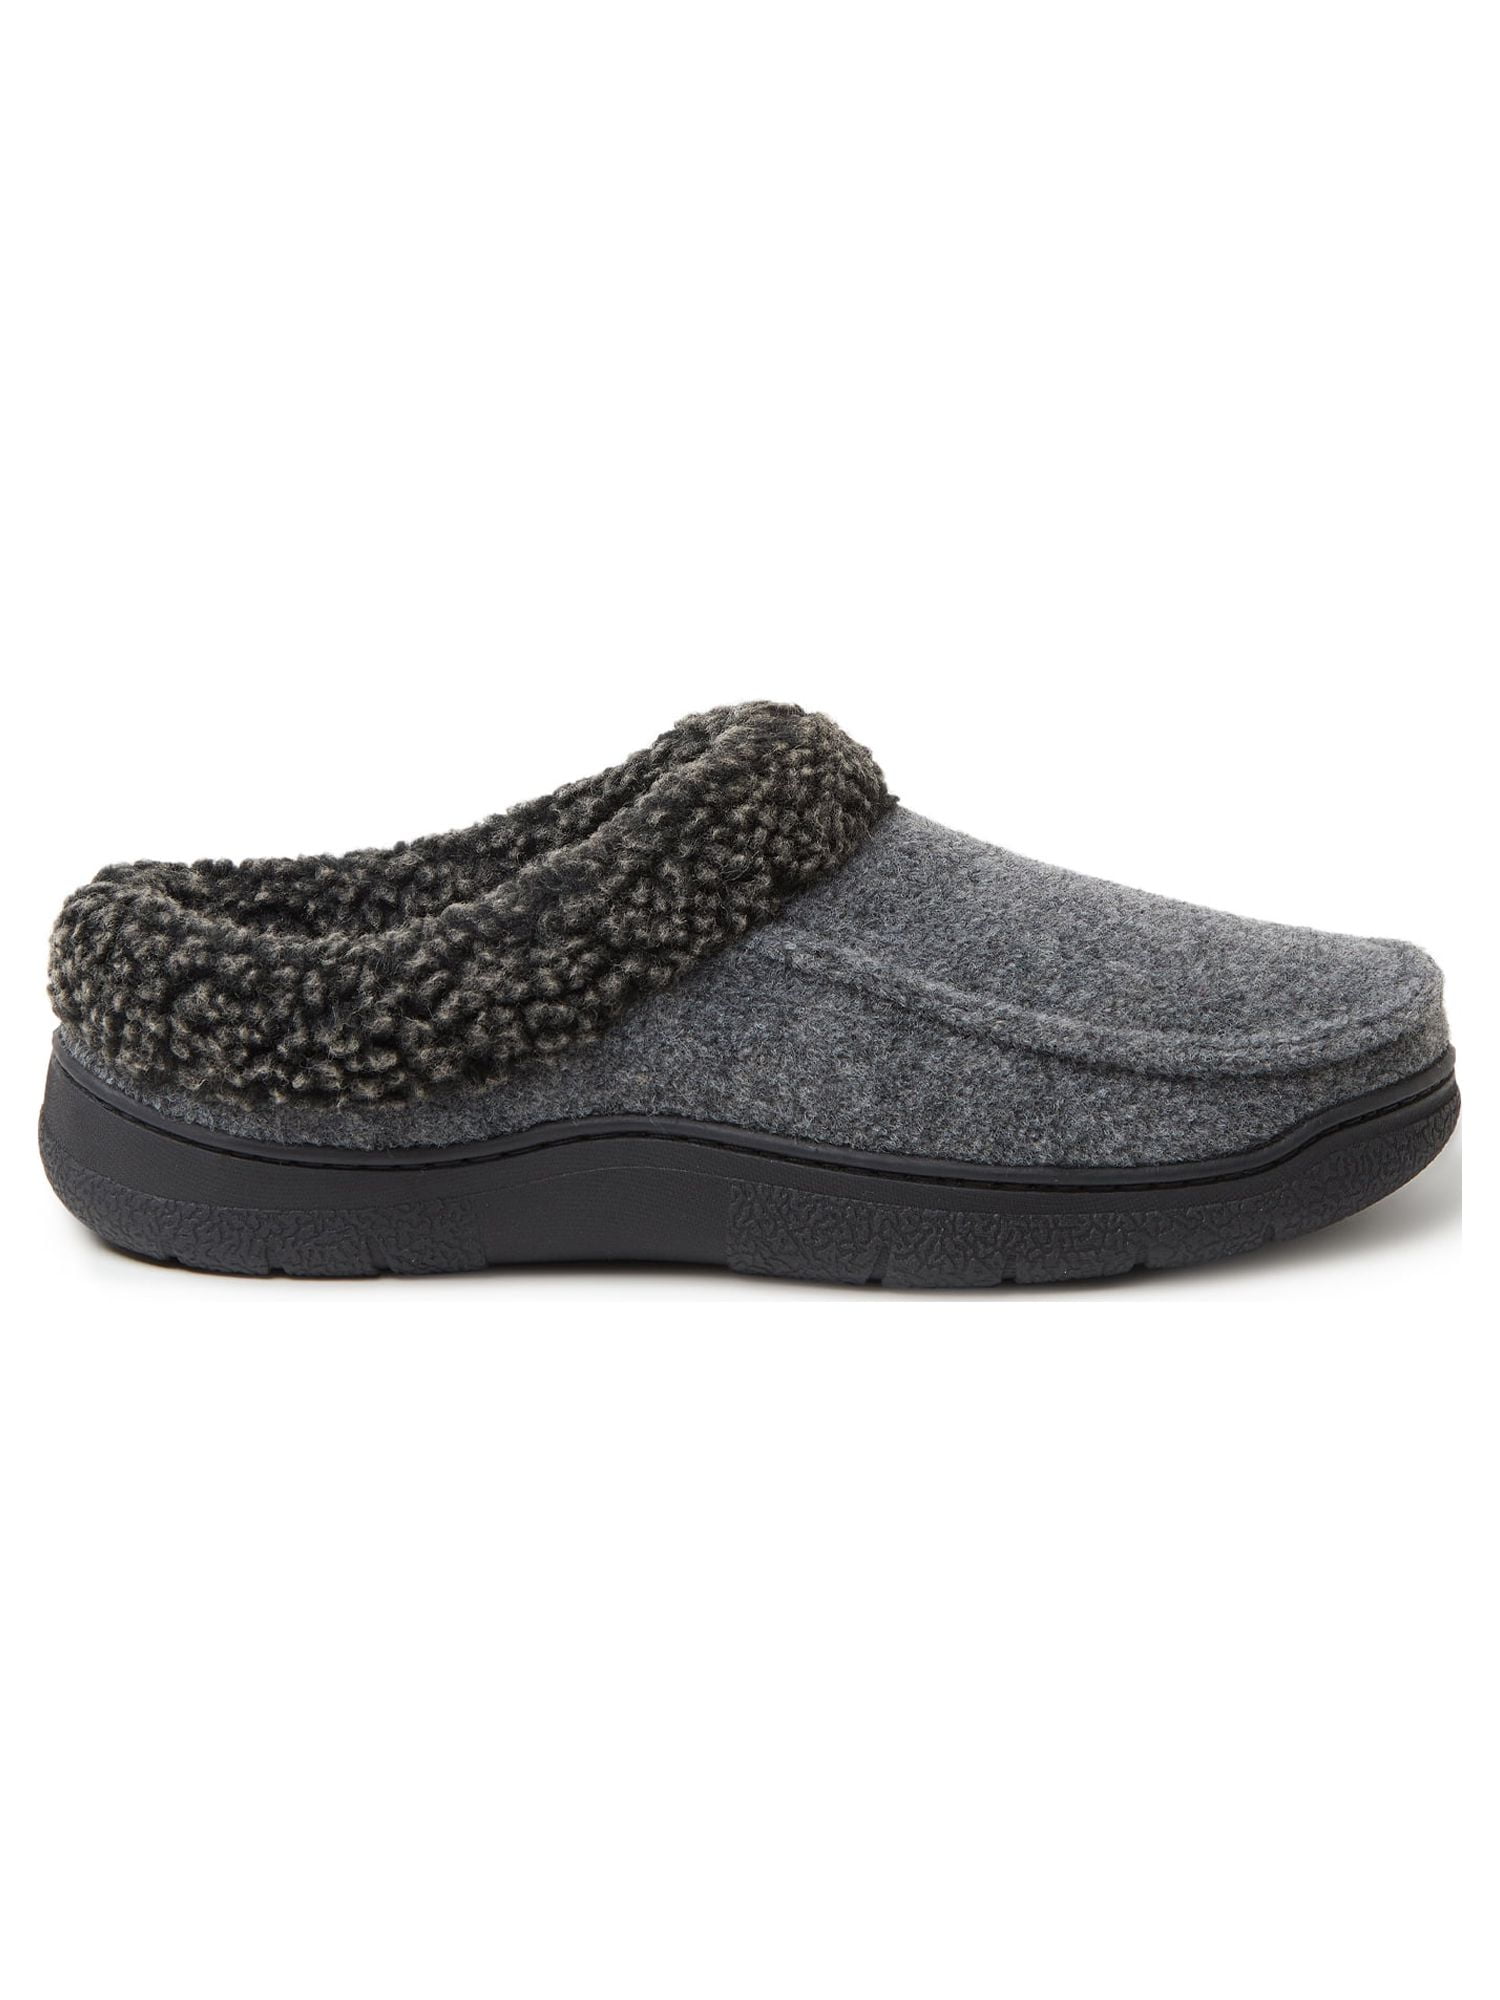 DF by Dearfoams Mens Perferated Aline Slippers - Walmart.com | Dearfoams,  Slippers, Womens slippers